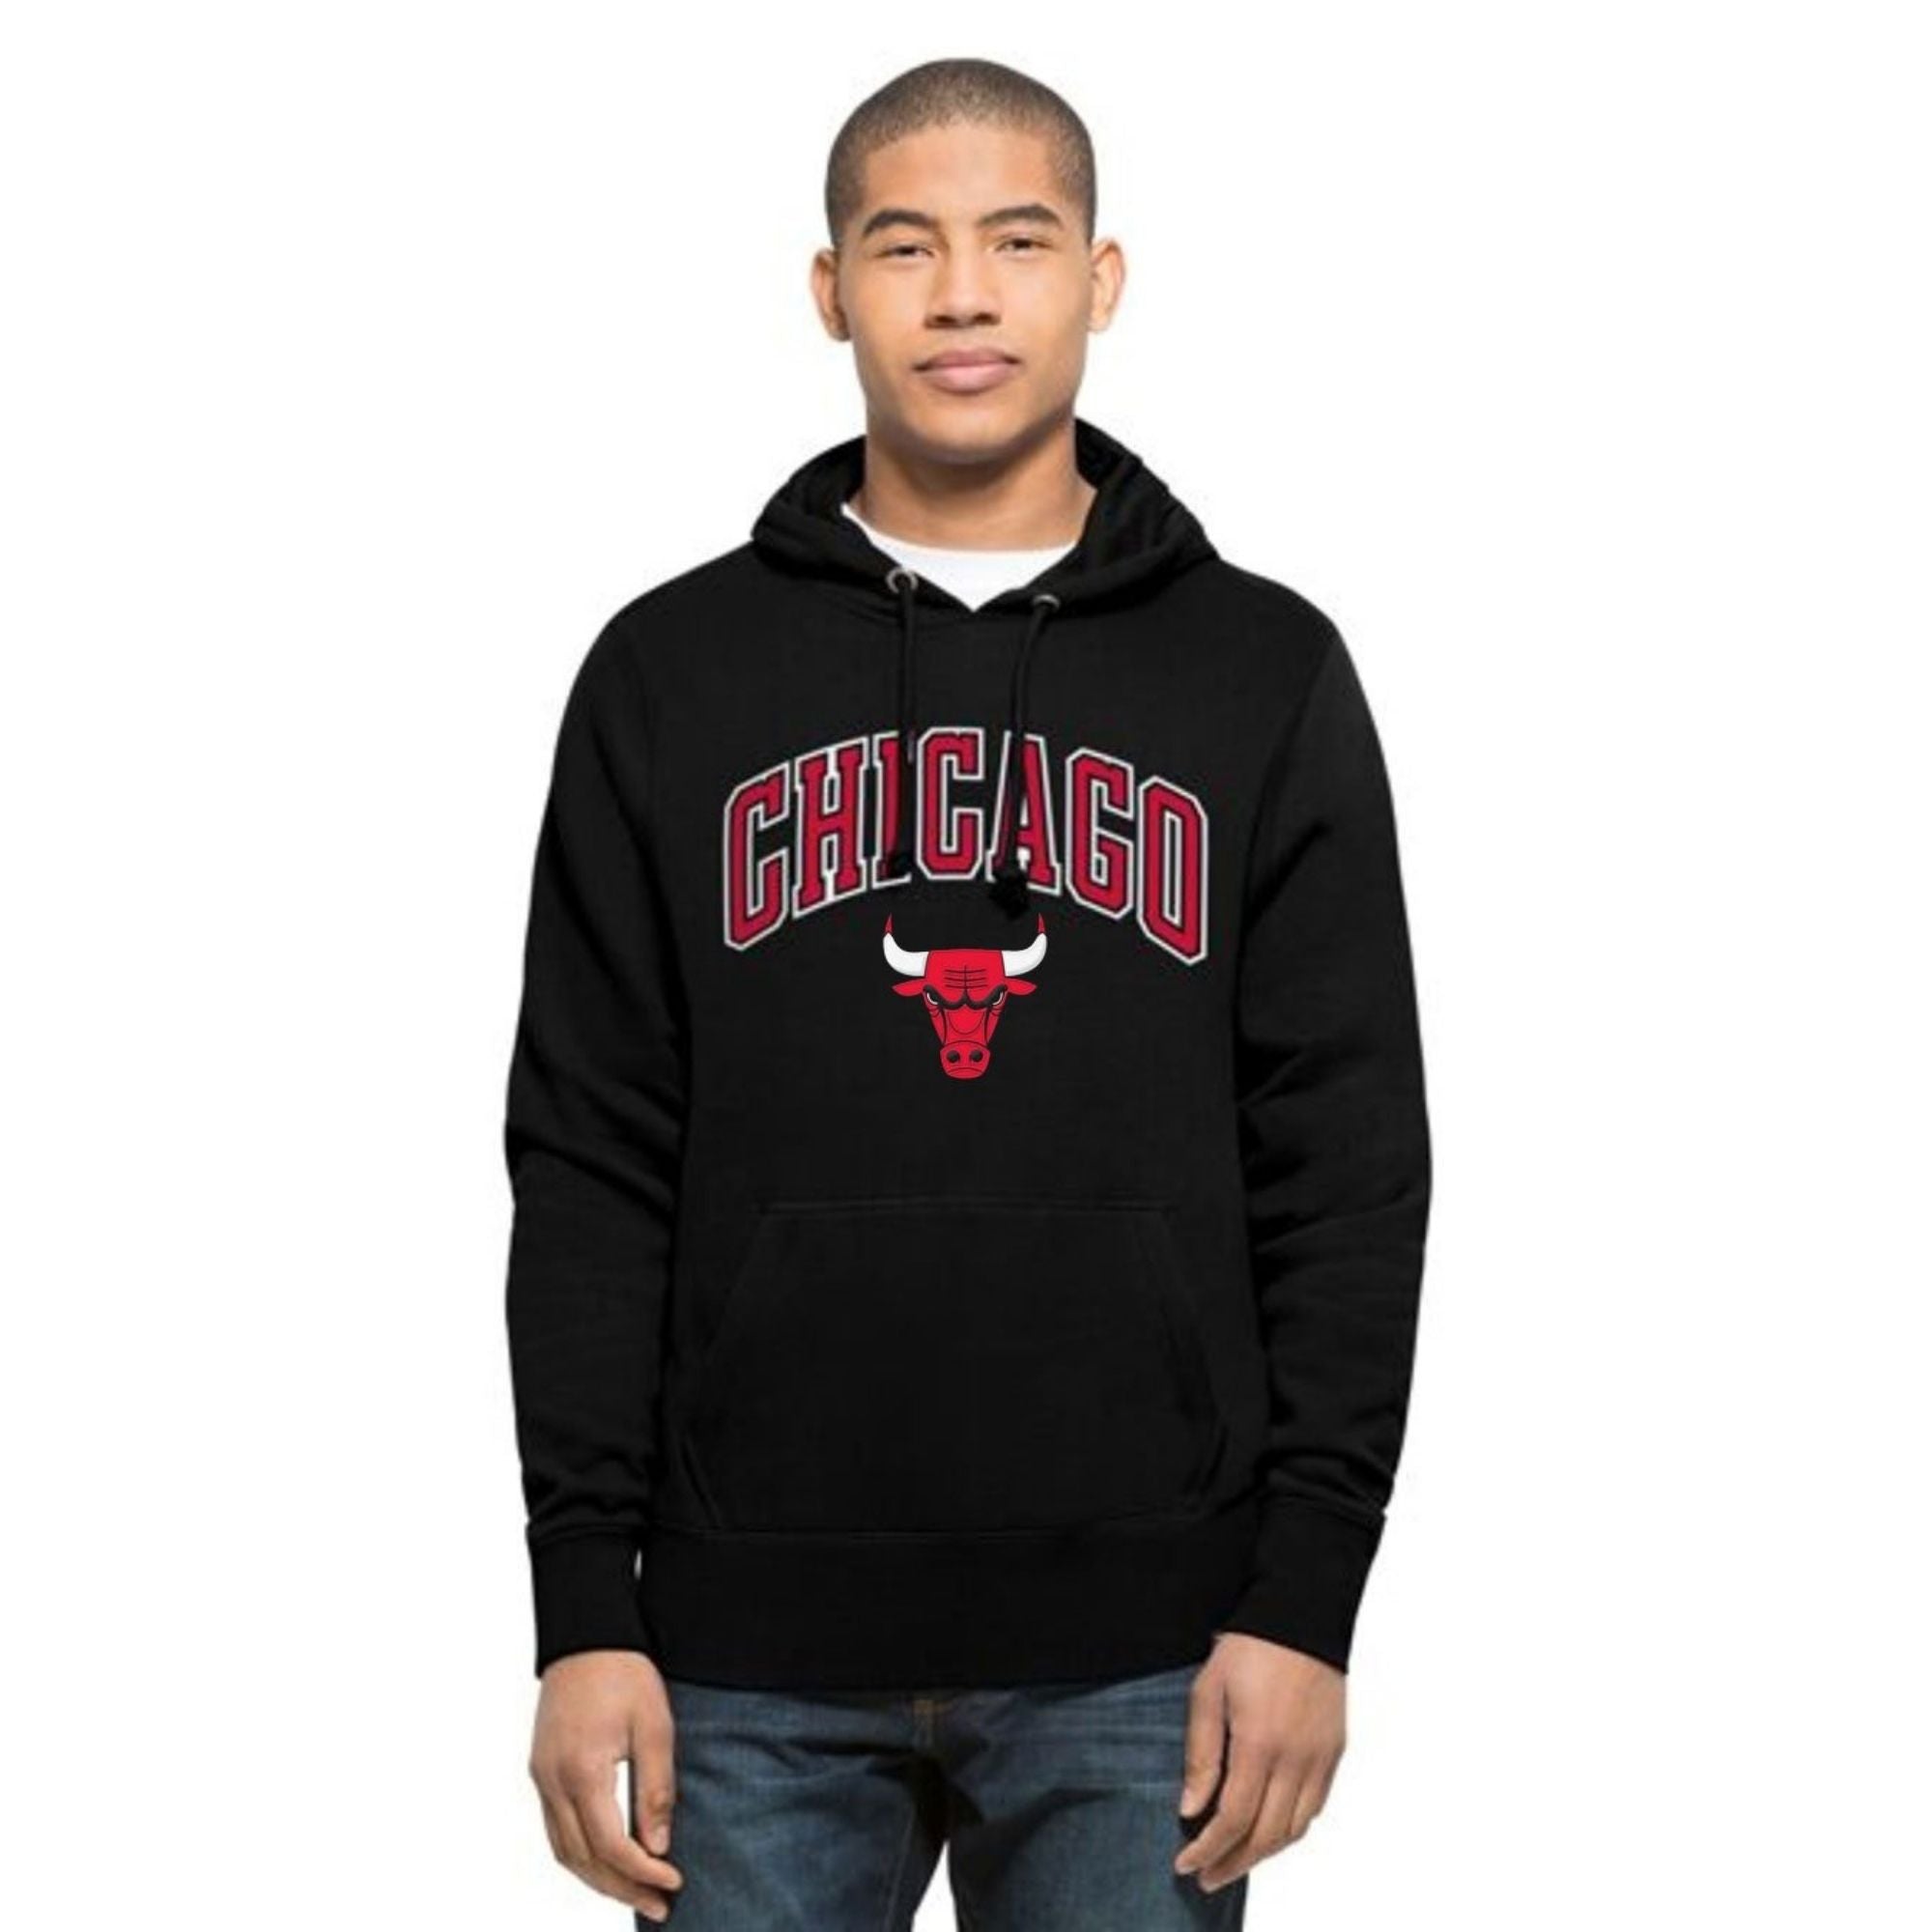 Officially Licensed Chicago Bulls Shirts & Hoodies - Clark Street Sports